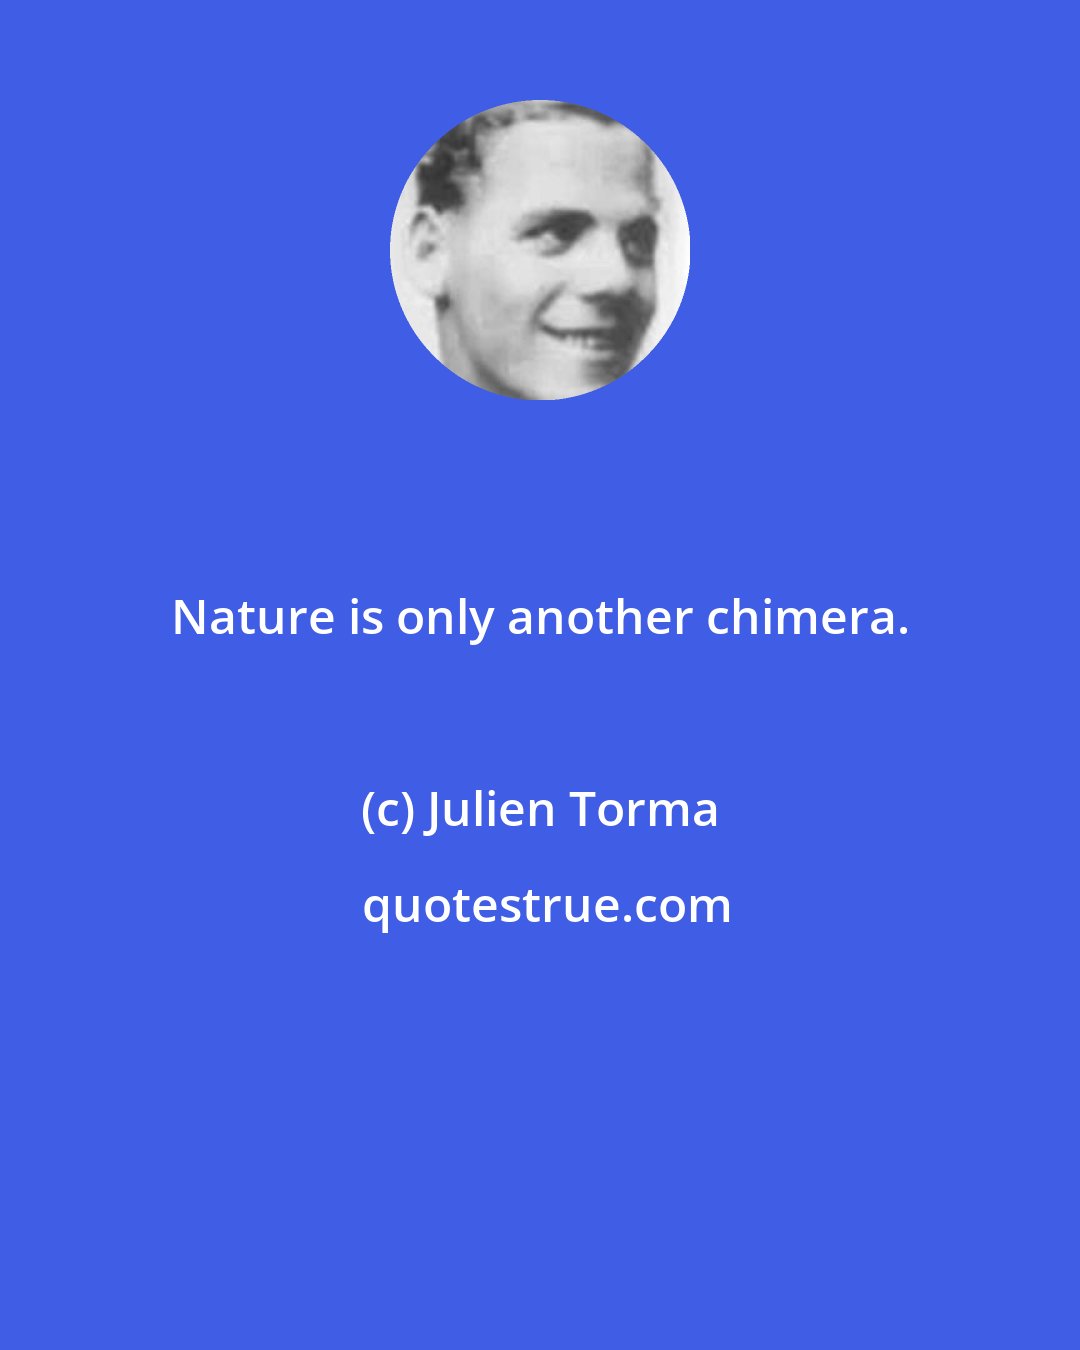 Julien Torma: Nature is only another chimera.